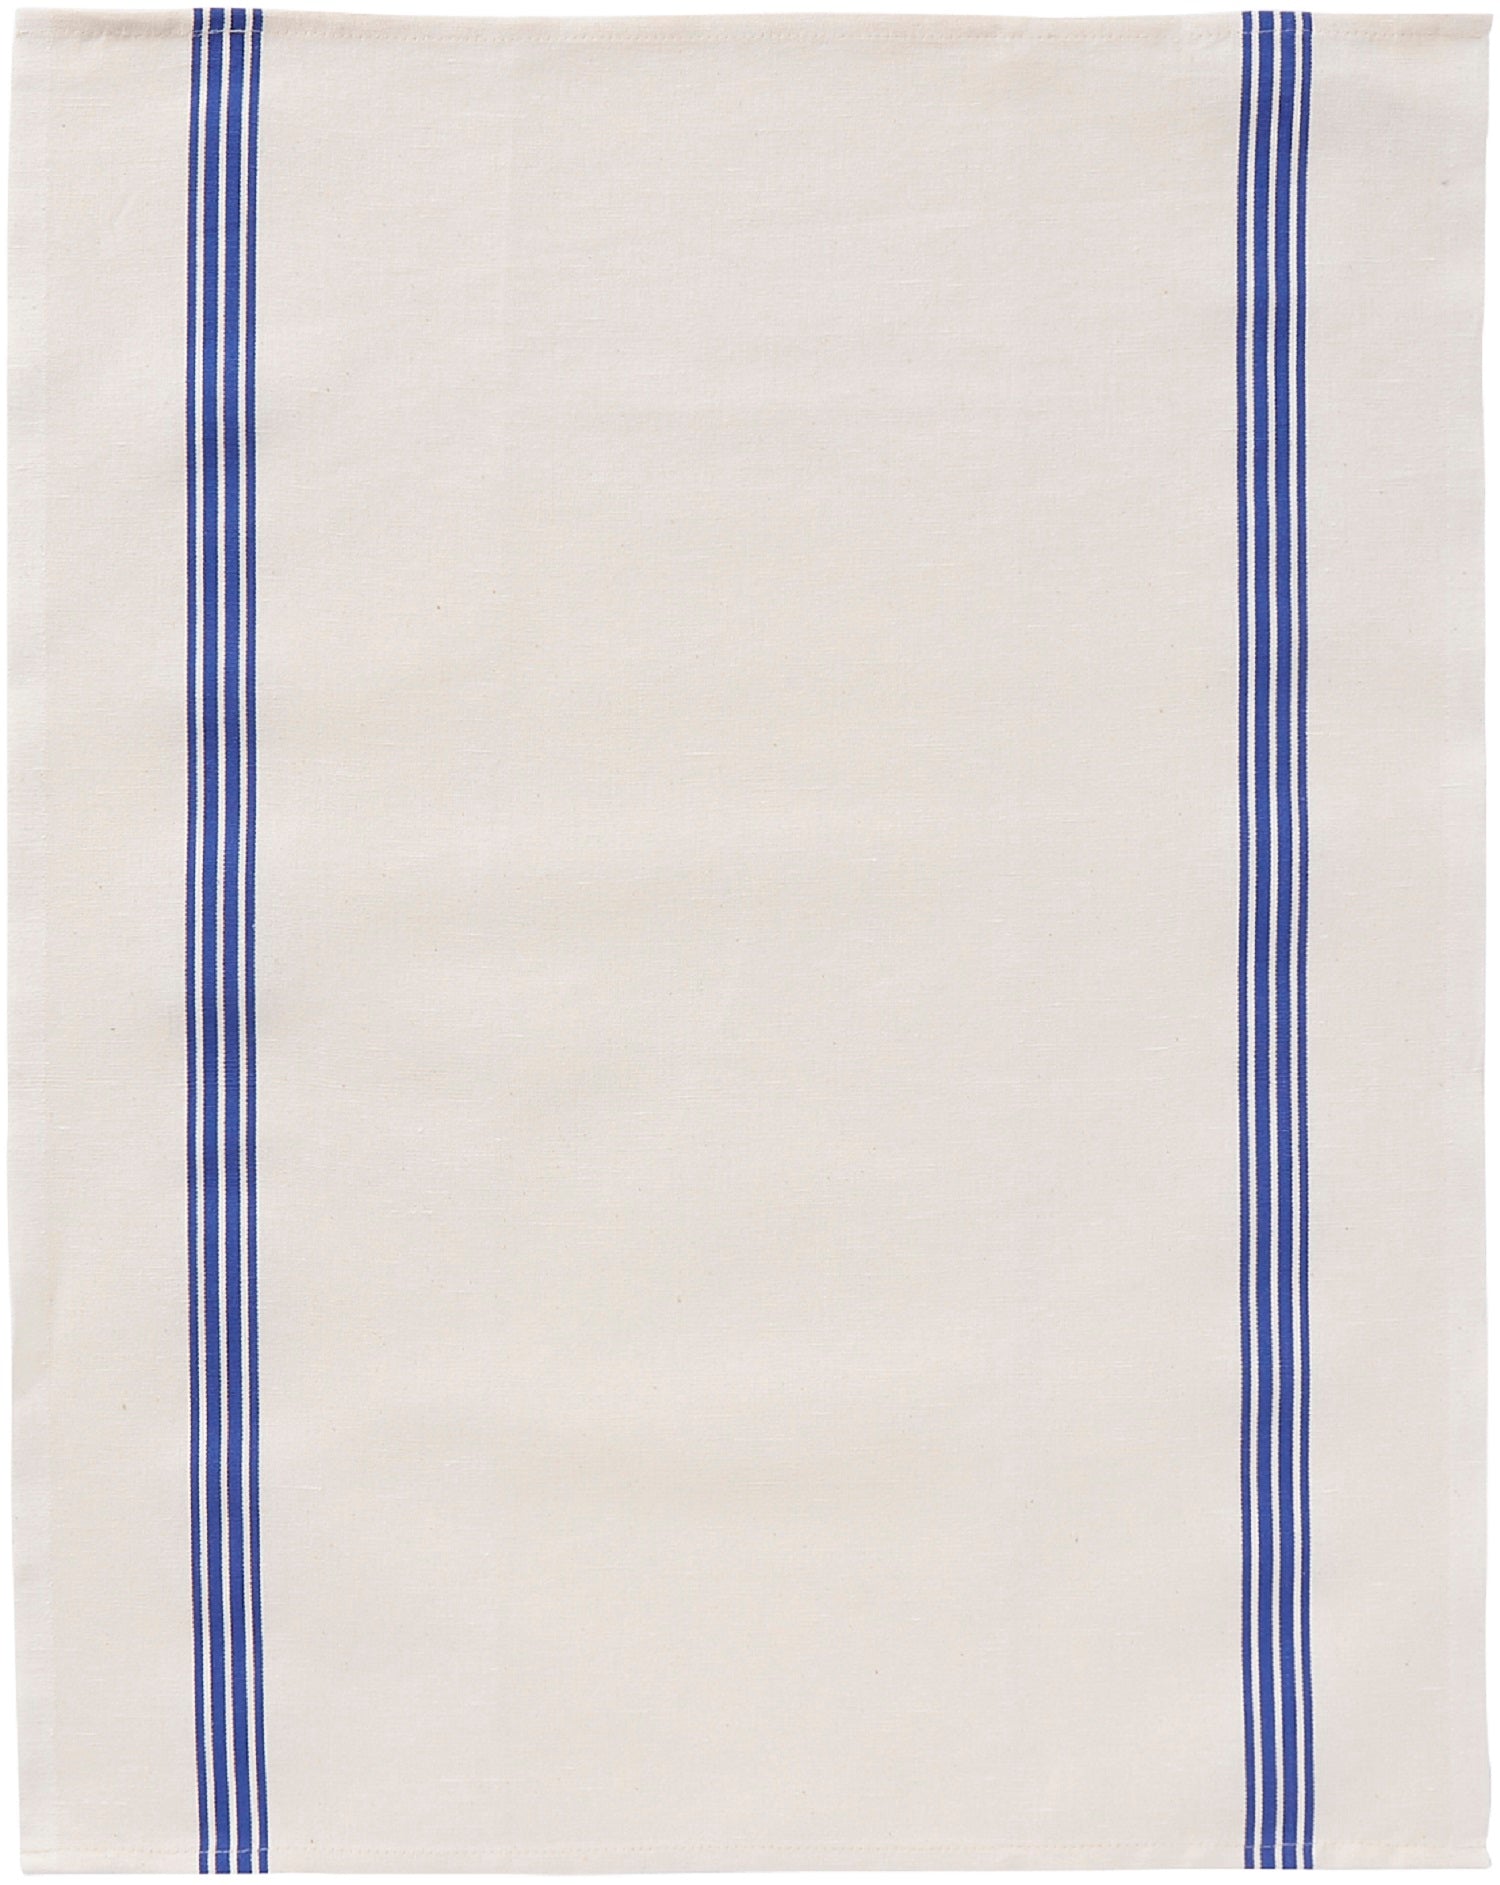 Charvet Editions "Piano" (Blue), Woven linen union tea towel. Made in France.